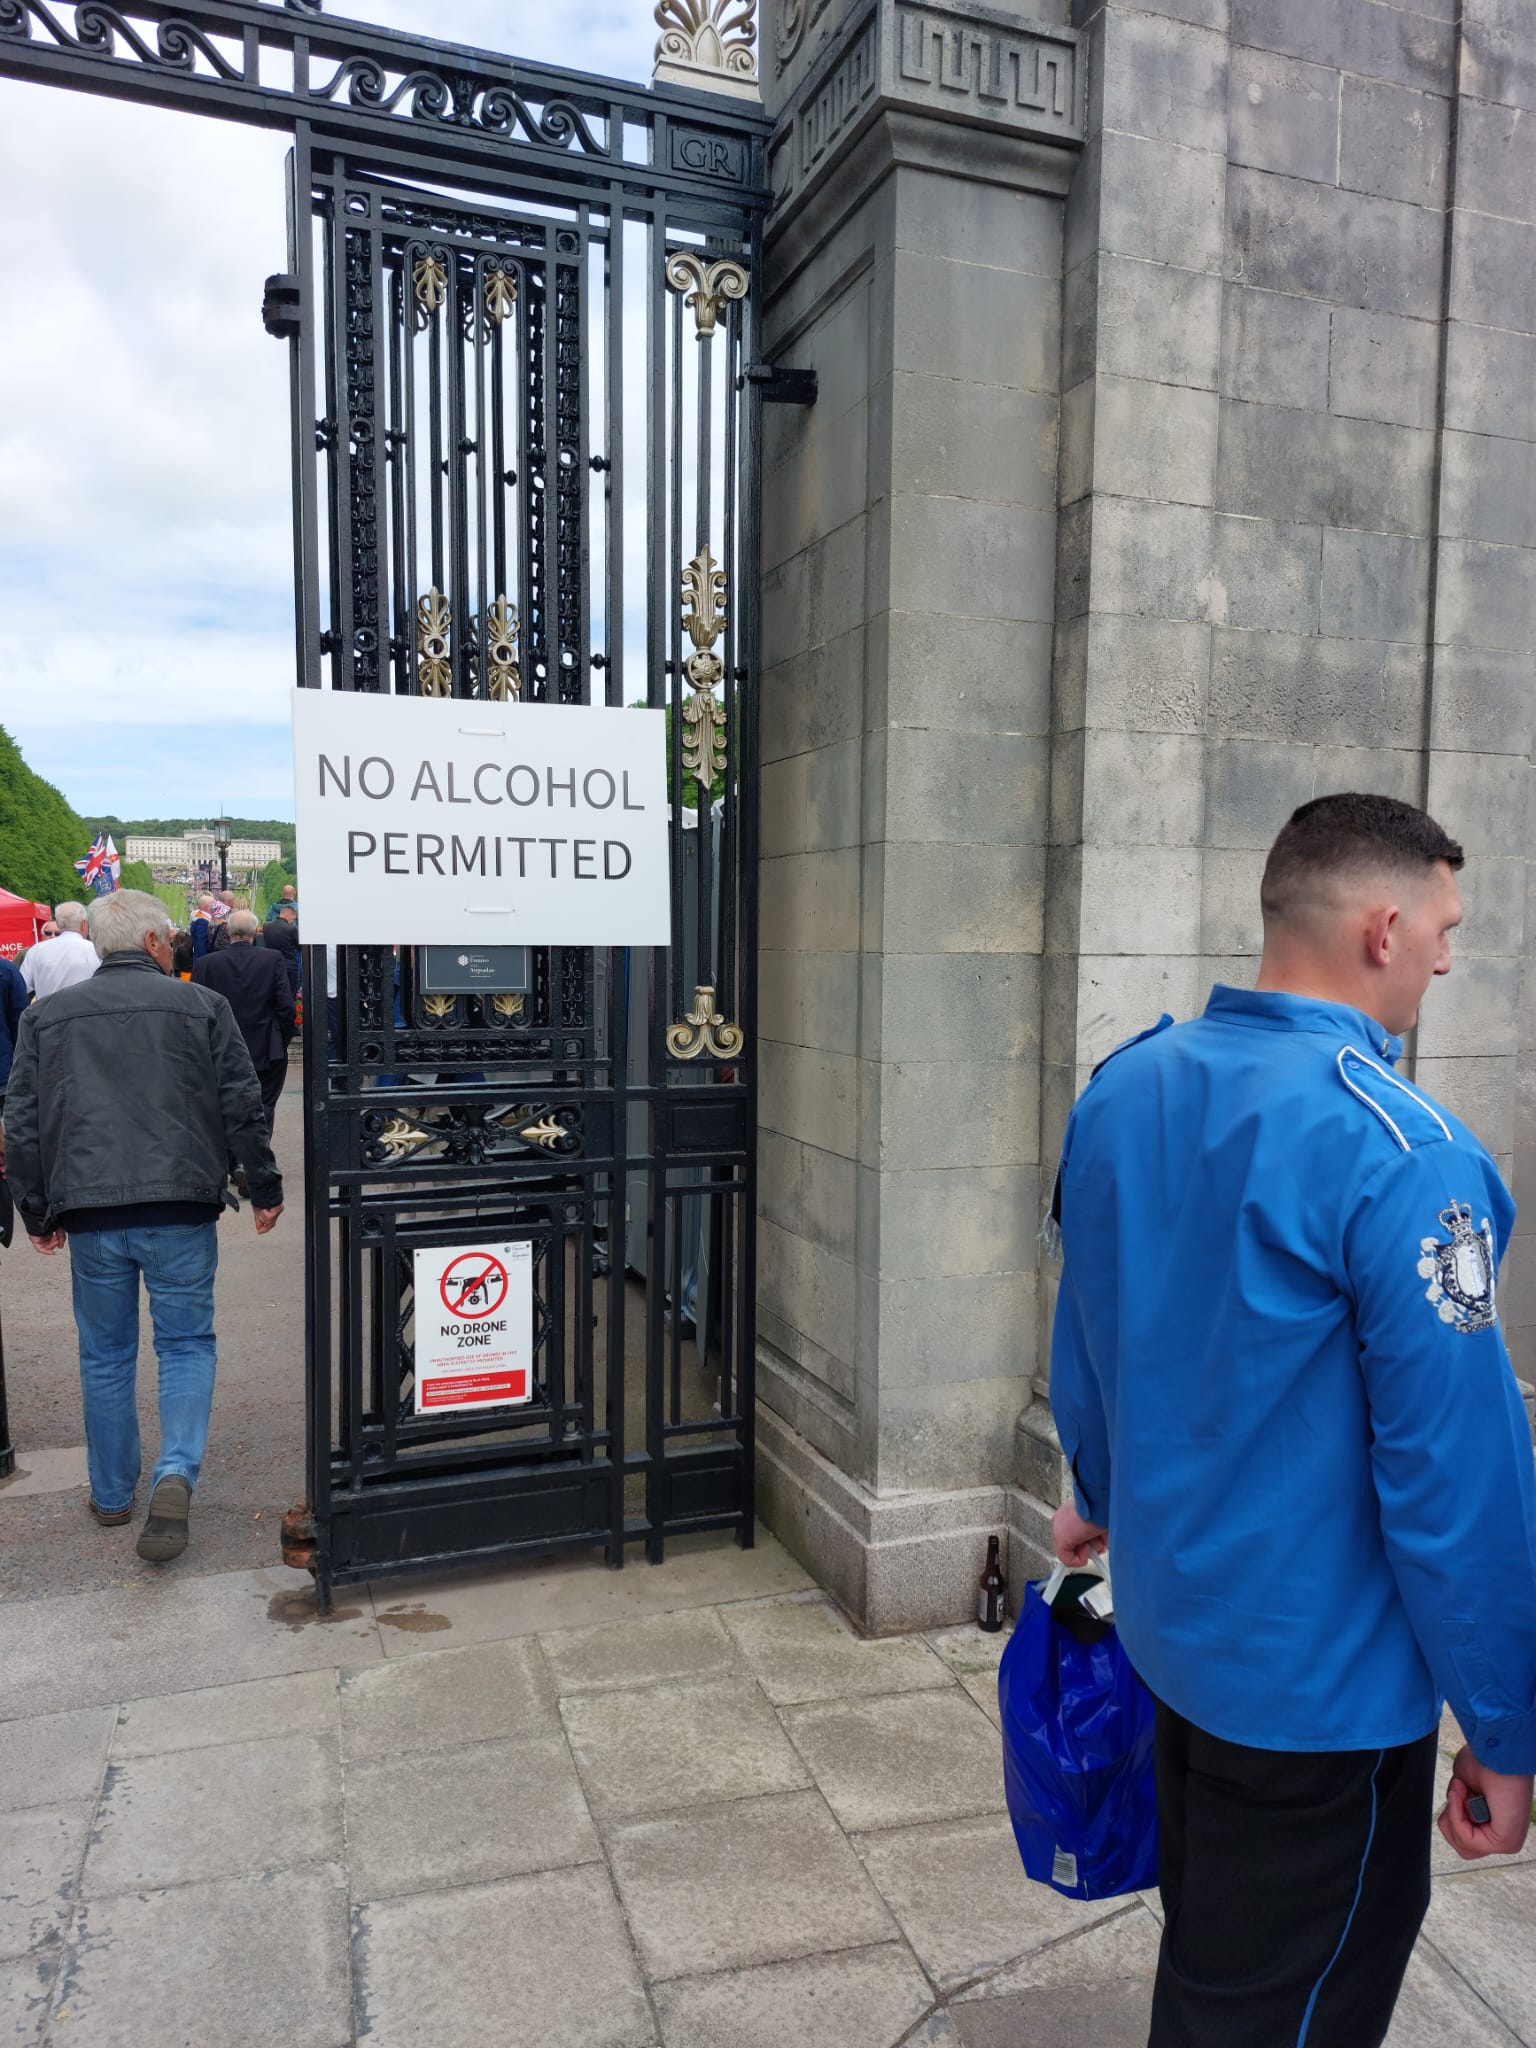 There was no alcohol at Stormont. 2. There’s no border in the Irish Sea. One of these statements is incorrect